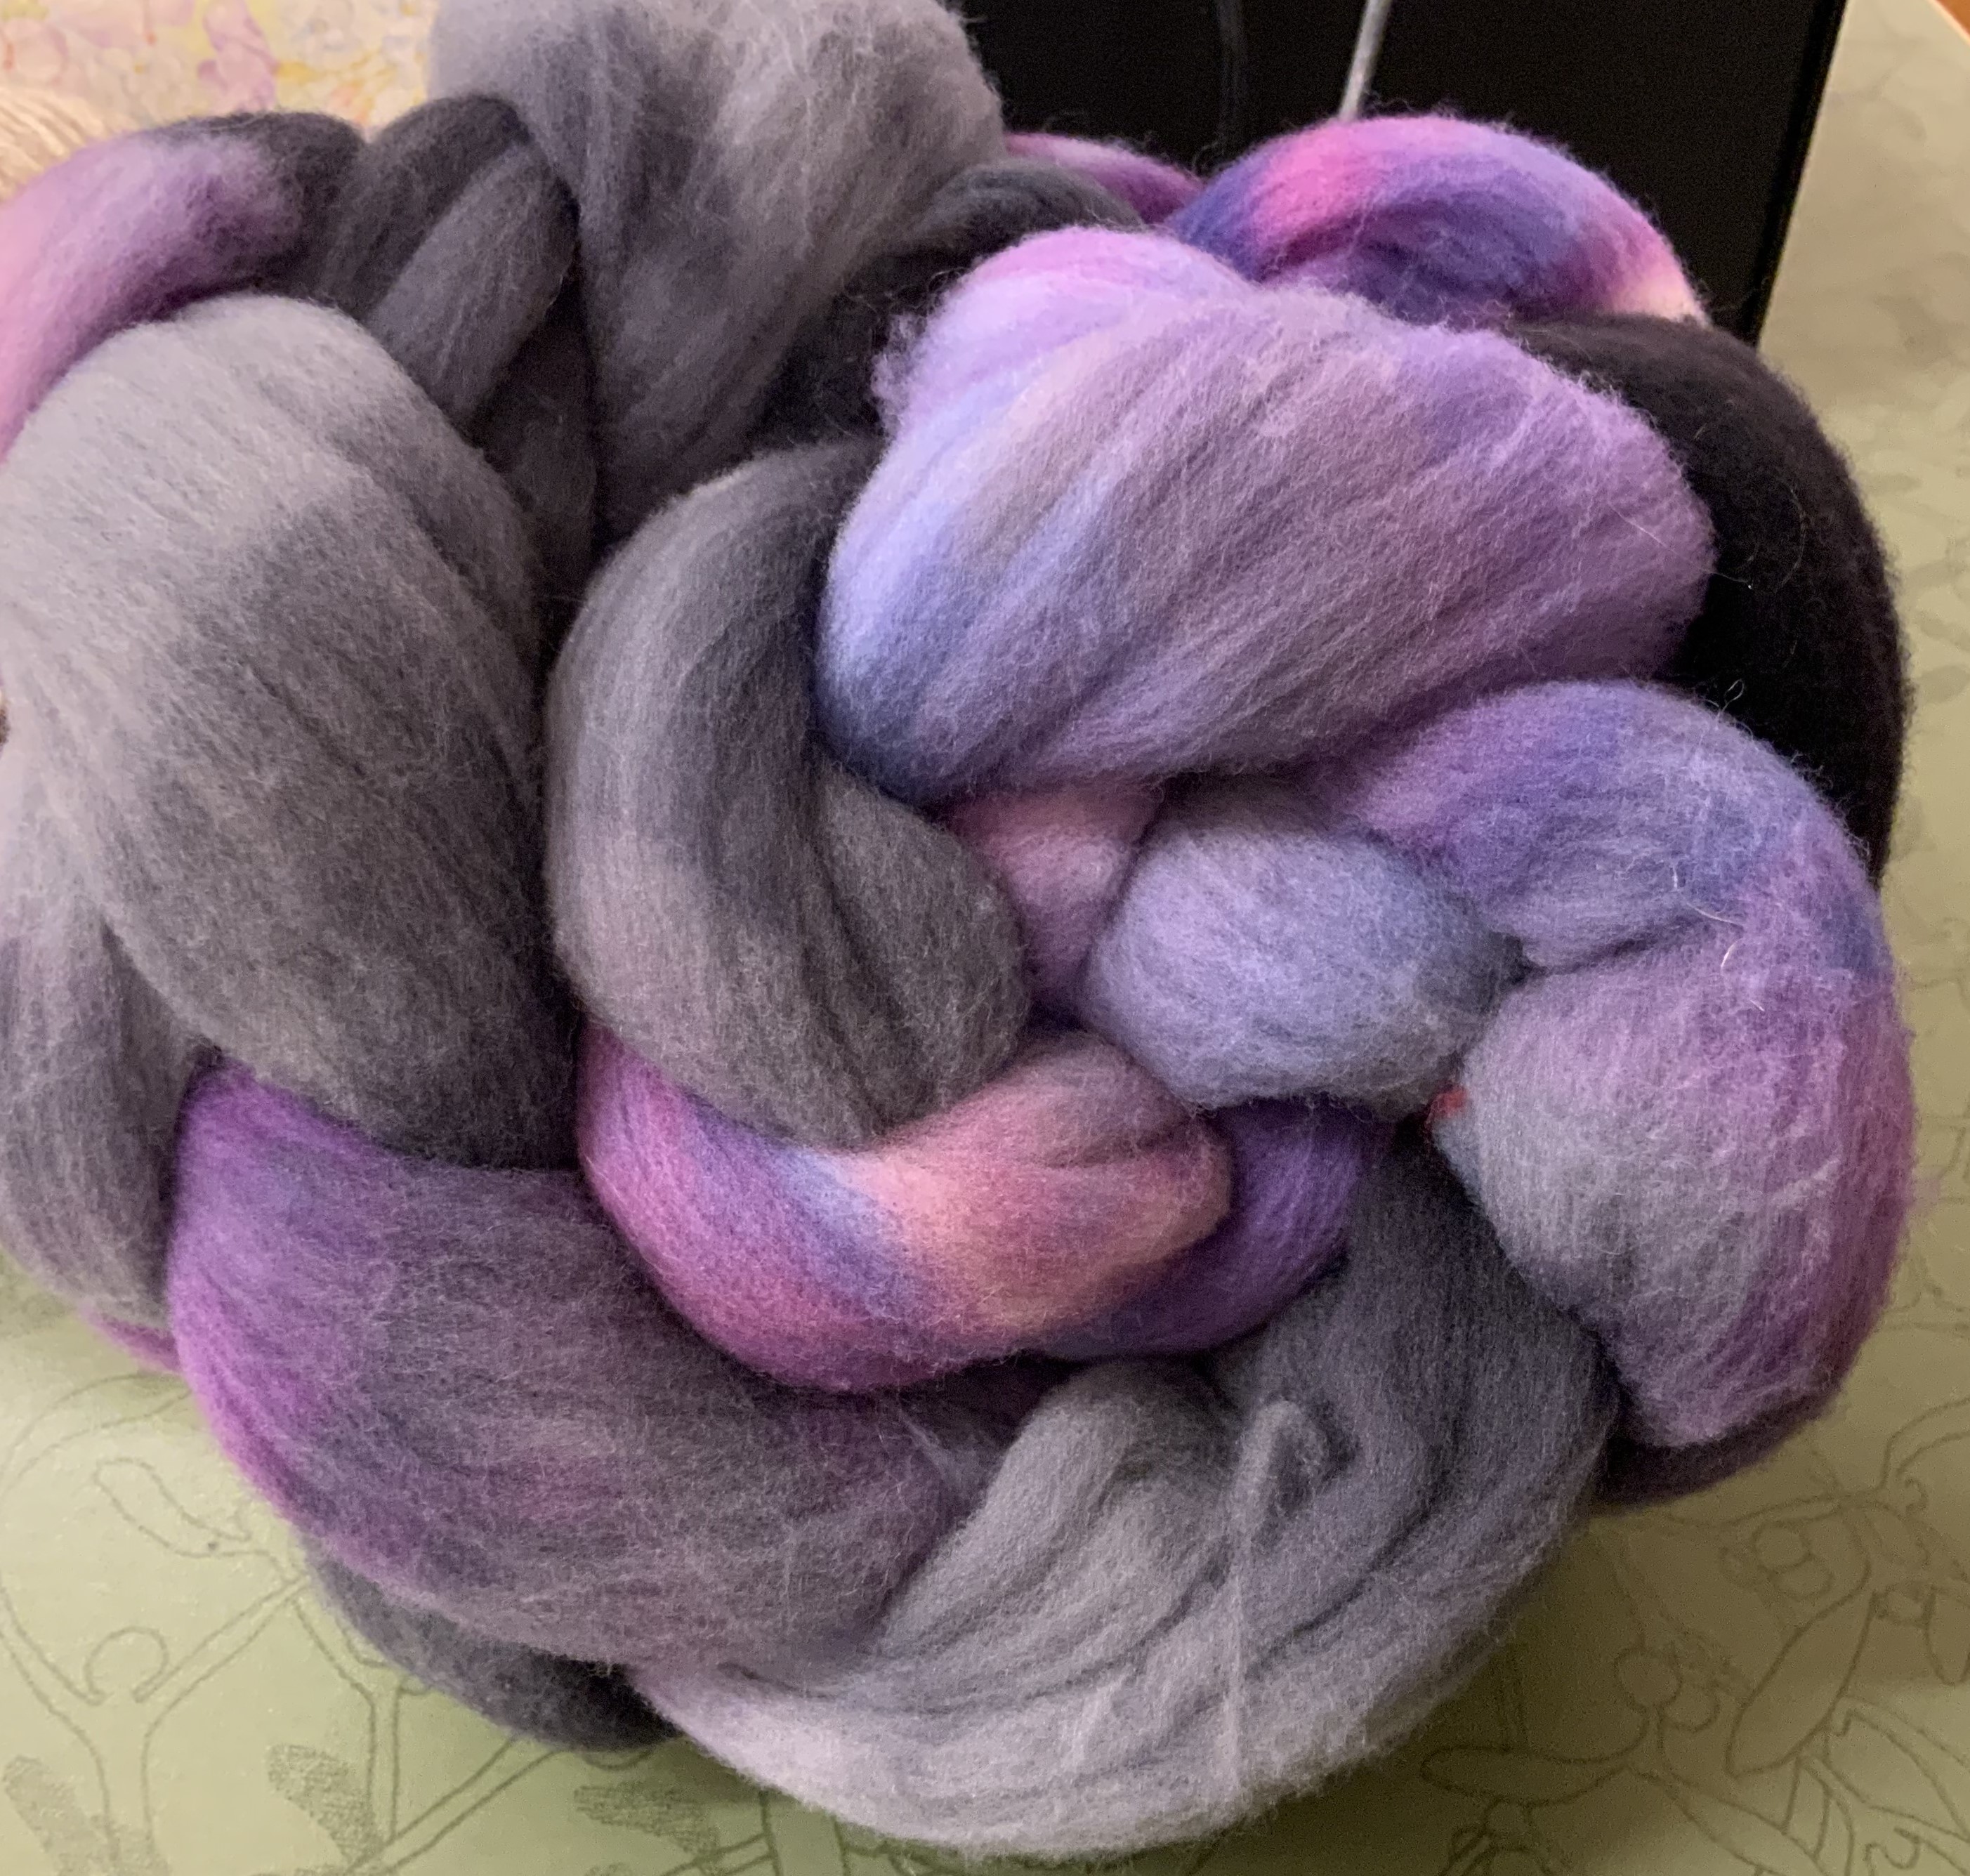 Rambouillet Hand Dyed Top - 115 g (4.0 oz) - Squish